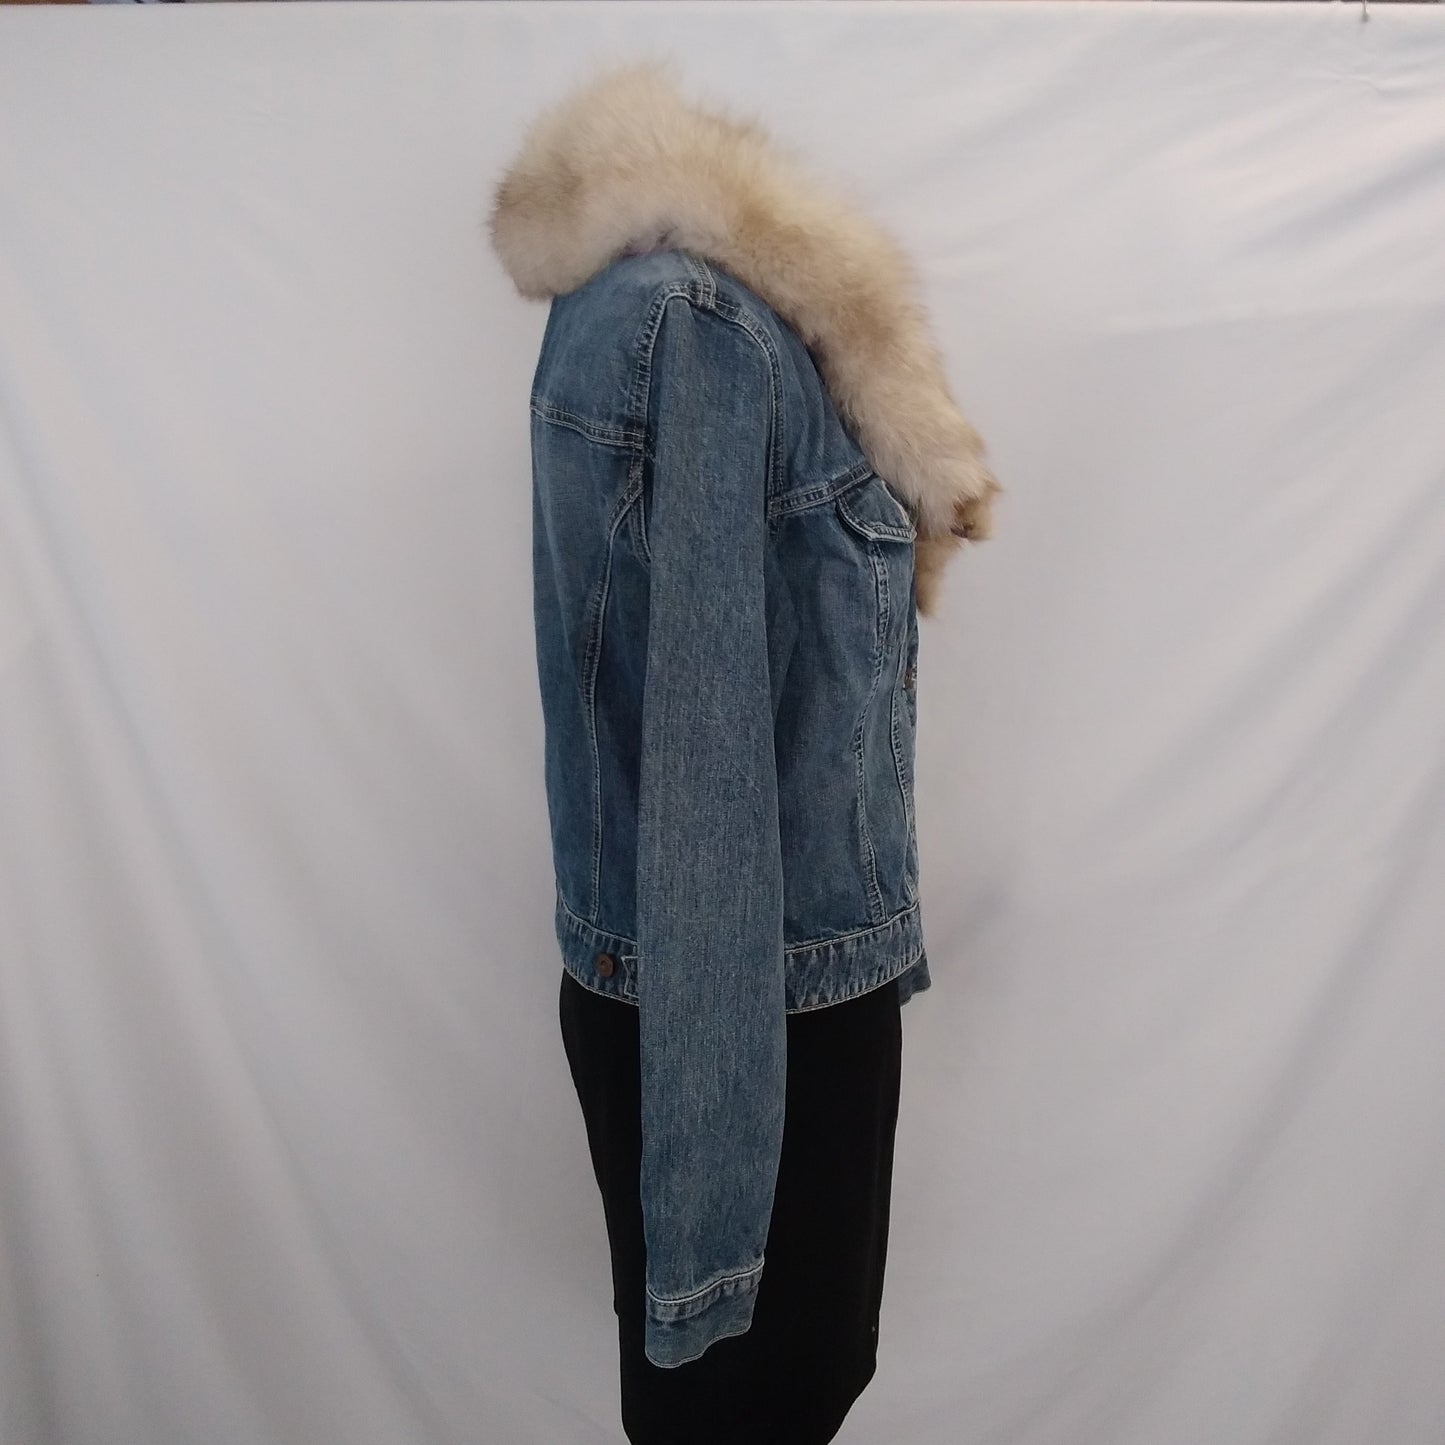 Up Cycled Gap Denim Jacket with Sewn-On Vintage Fur Collar - L